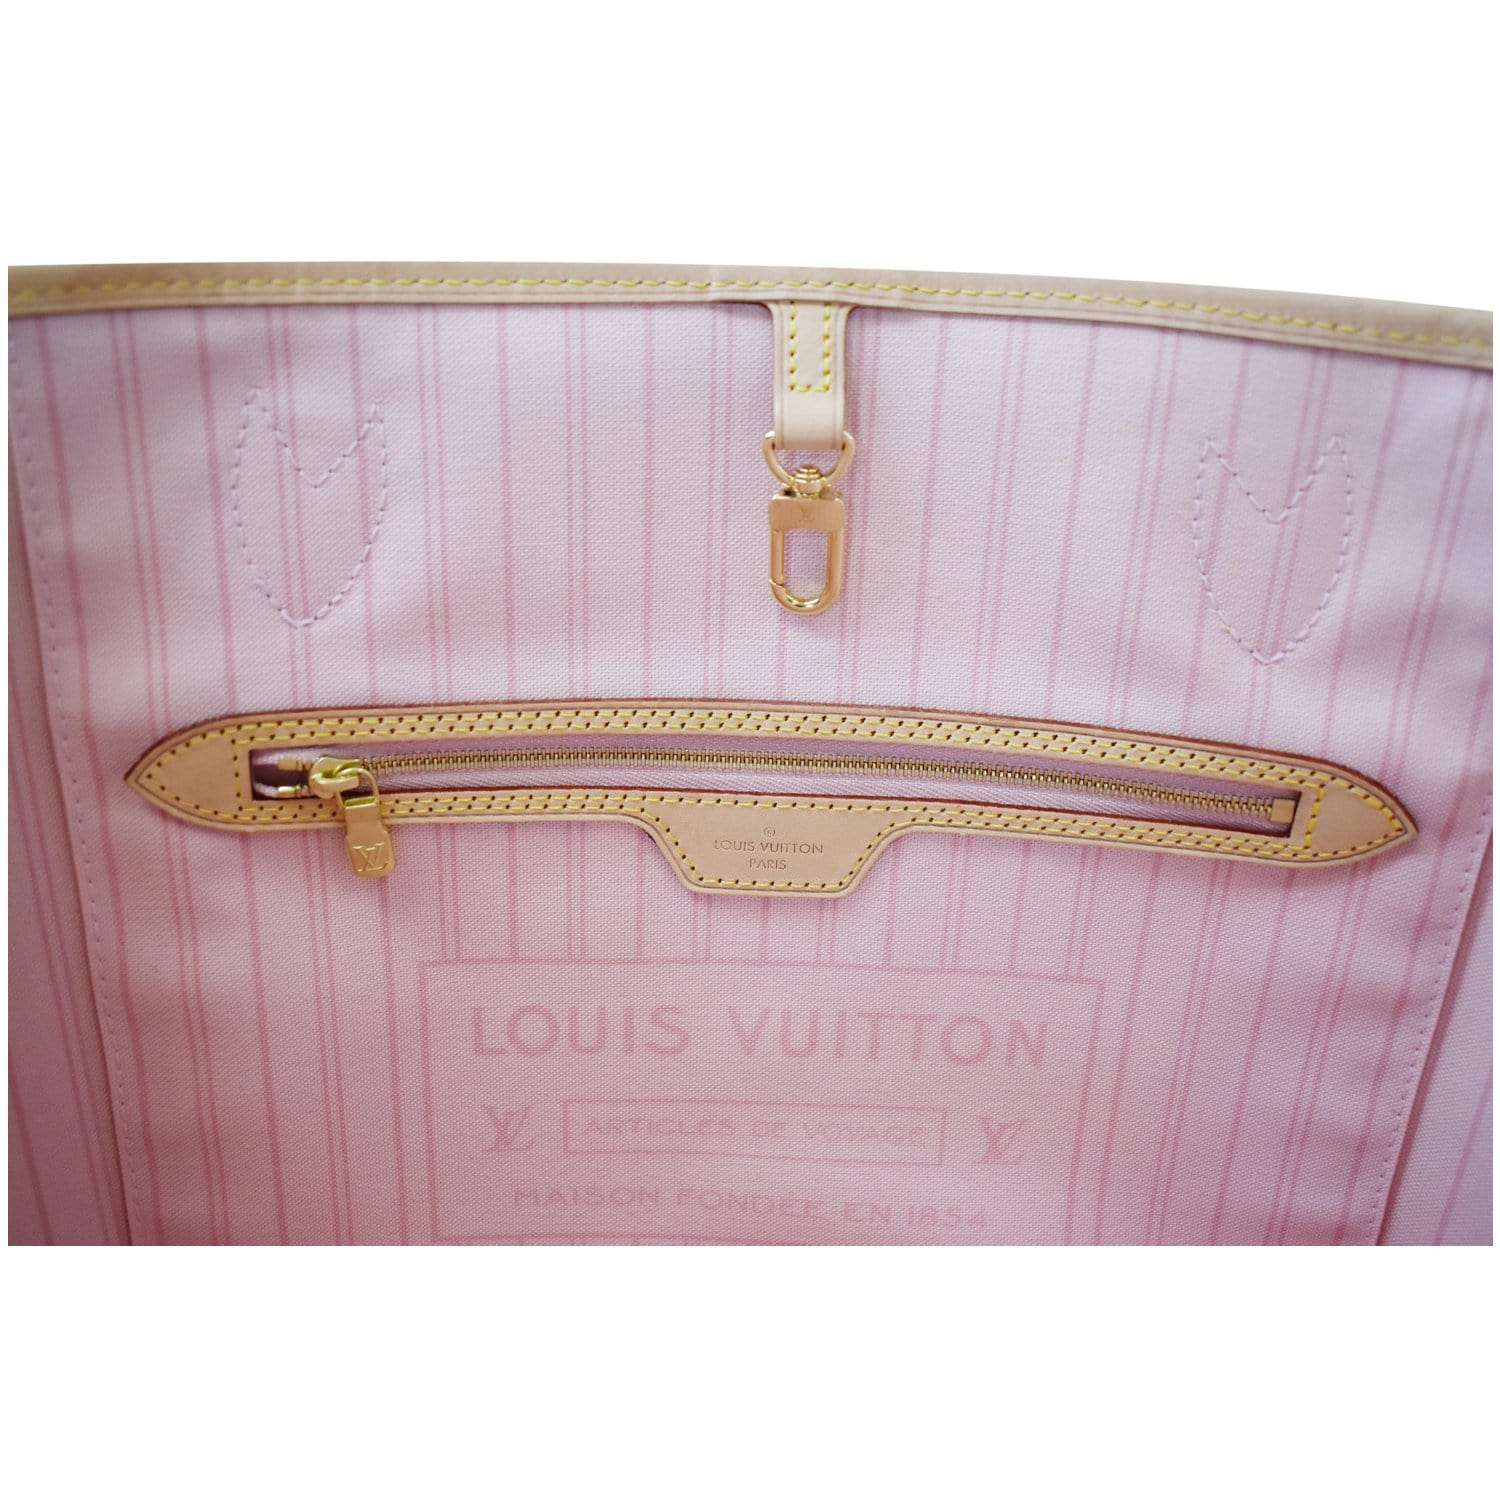 Authentic Louis Vuitton Neverfull MM Rose Ballerina Pink Interior for